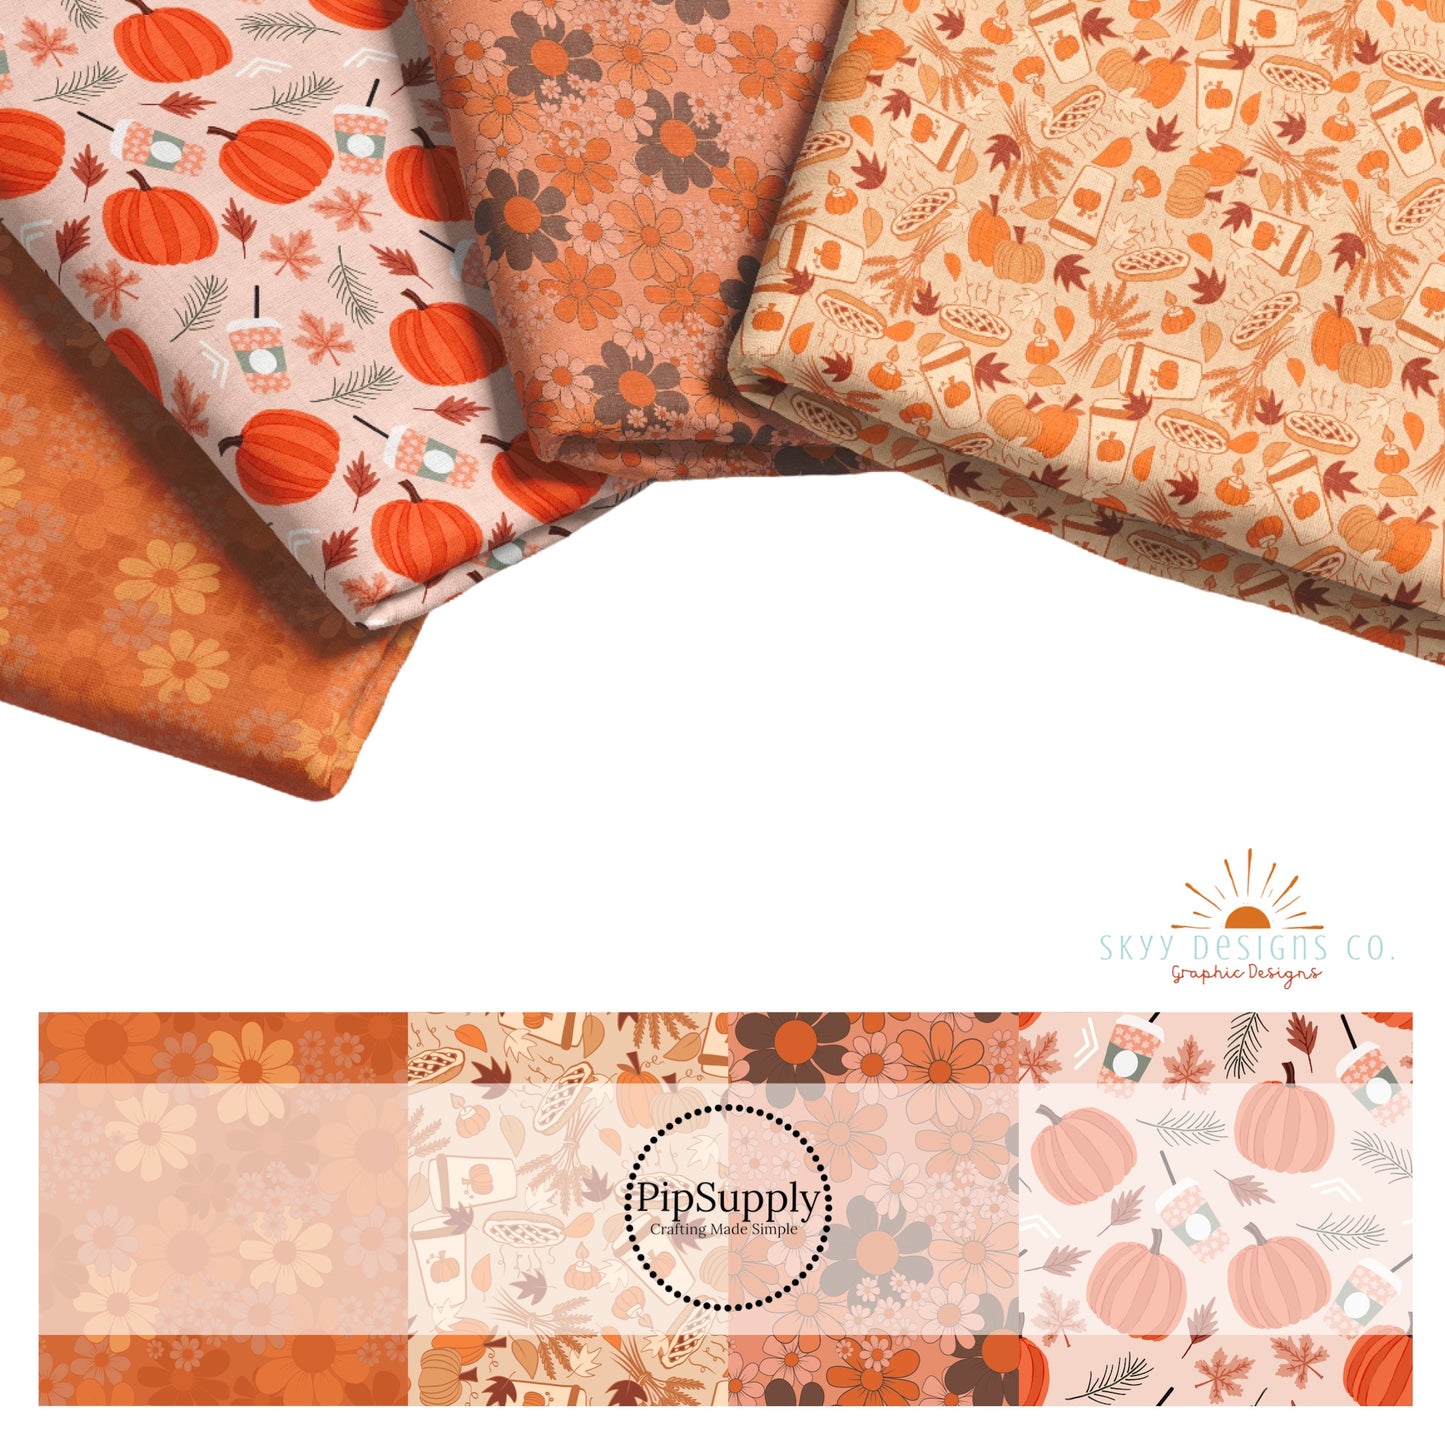 Four different multi colored fall themed fabric with flowers, pumpkins, and pies on a white background